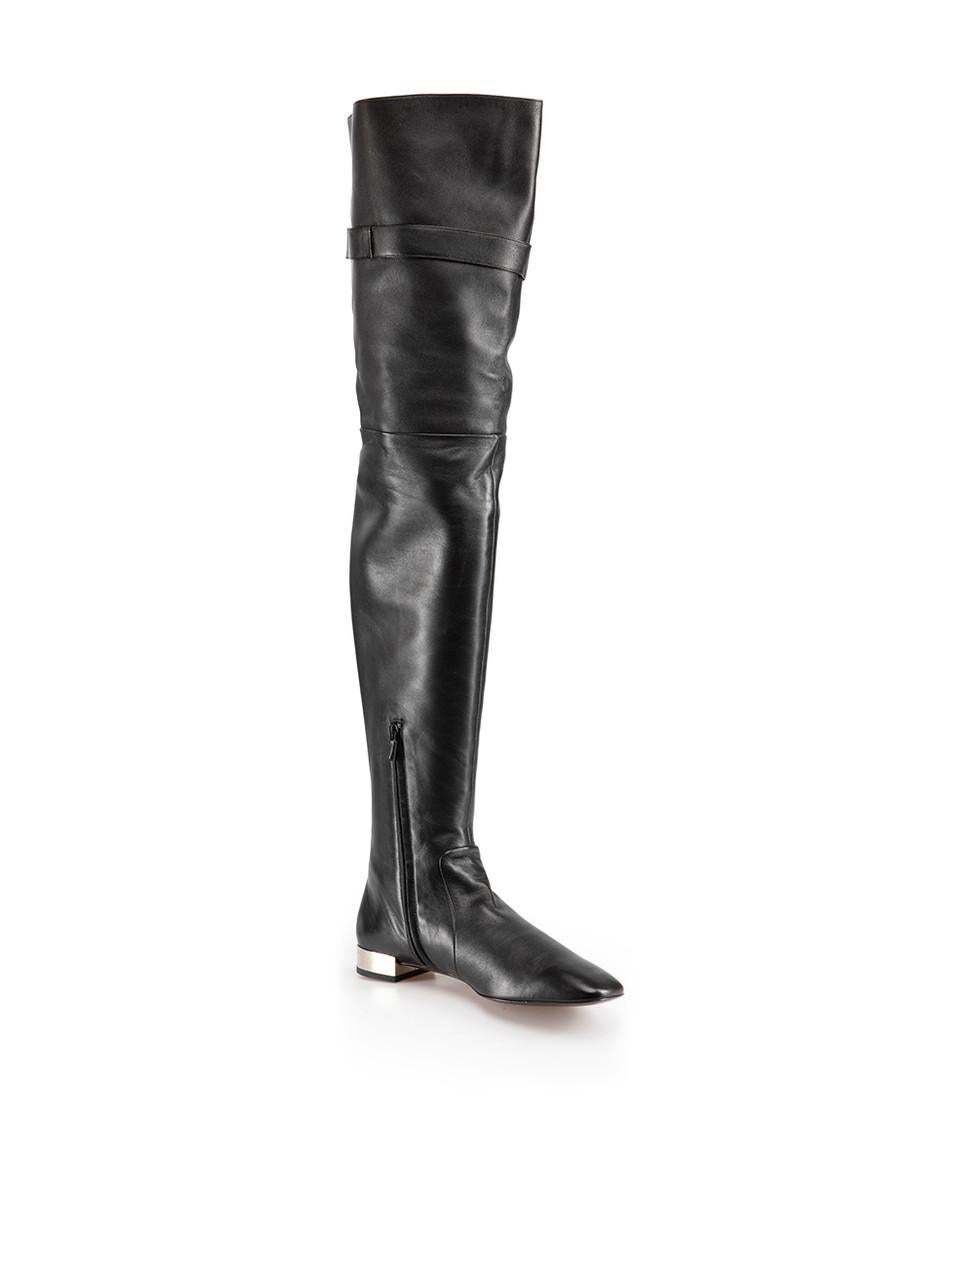 CONDITION is Never worn. No visible wear to boots is evident on this new Roger Vivier designer resale item. These boots come with original box and dust bag.

Details
Stivali Cuissard
Black
Leather
Thigh high boots
Square toe
Flat low heel with metal